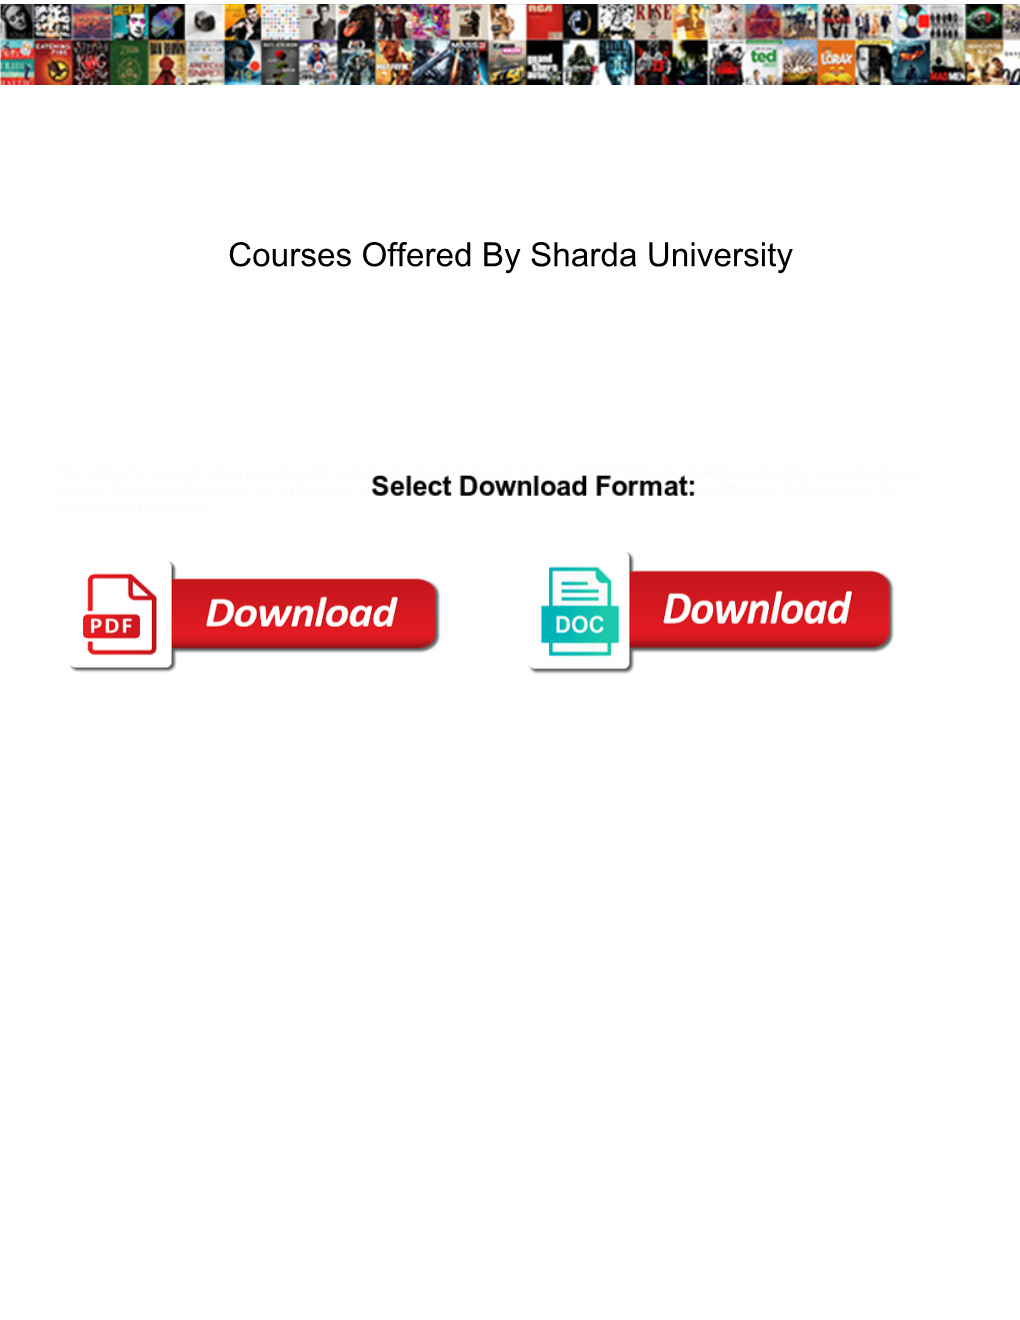 Courses Offered by Sharda University